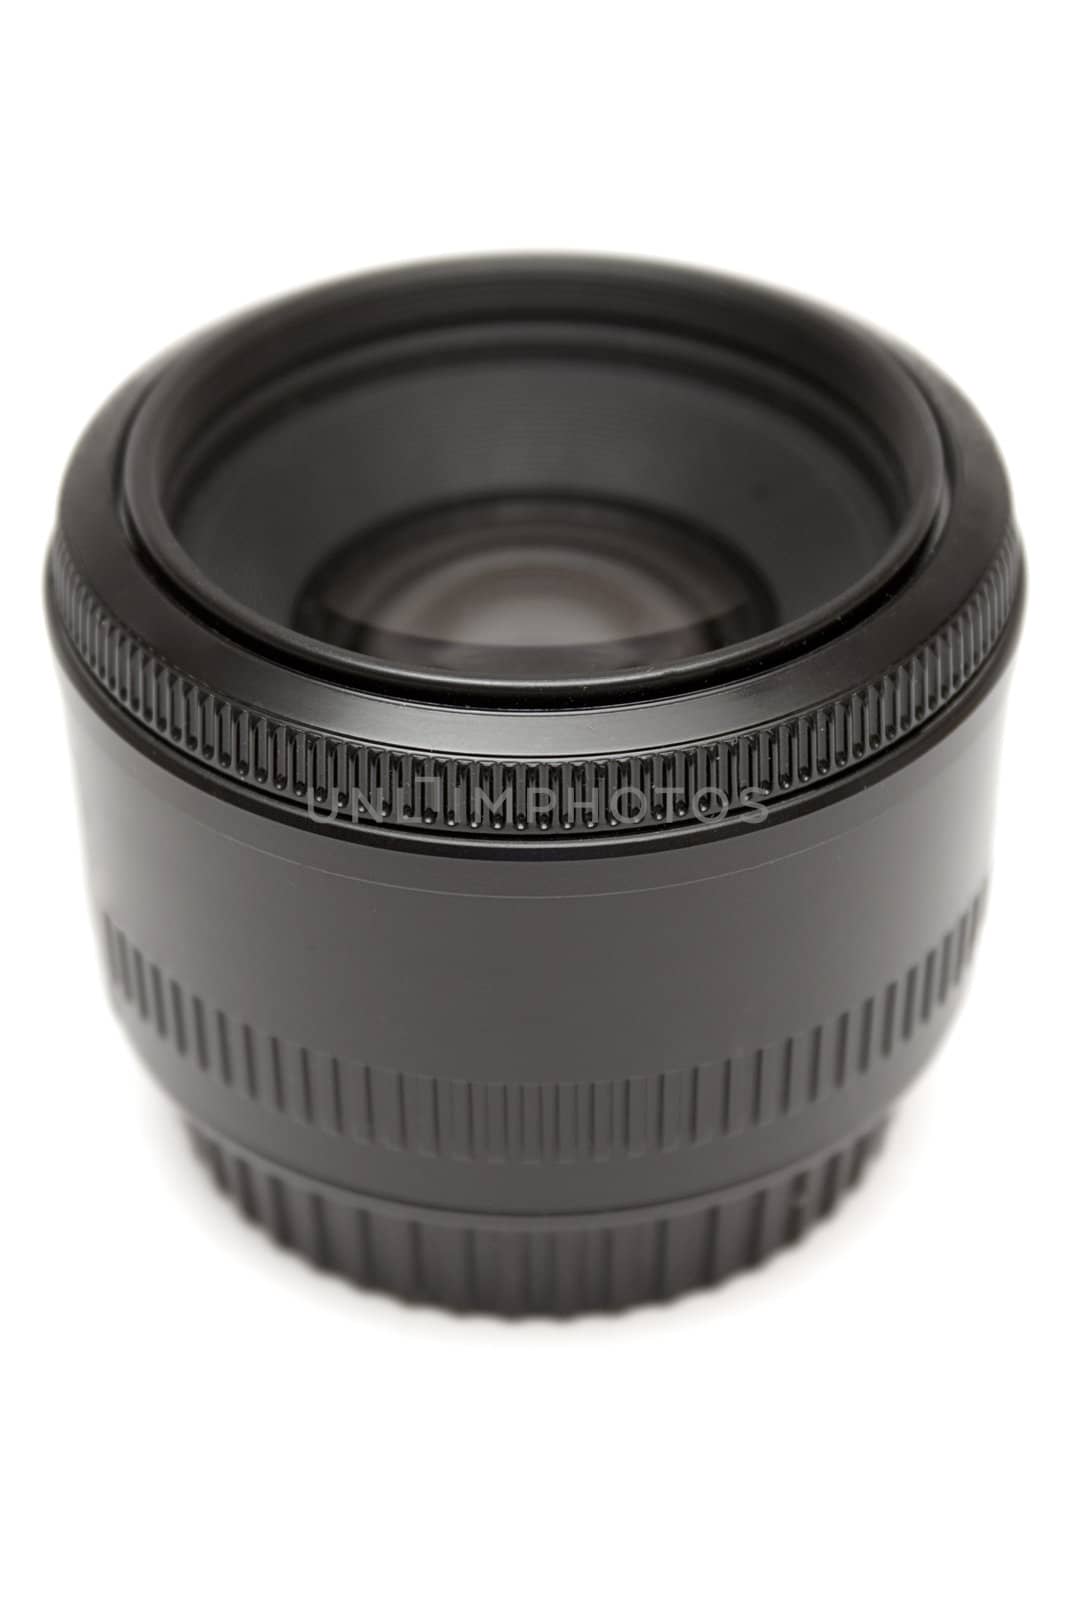 50mm Prime Lens by winterling